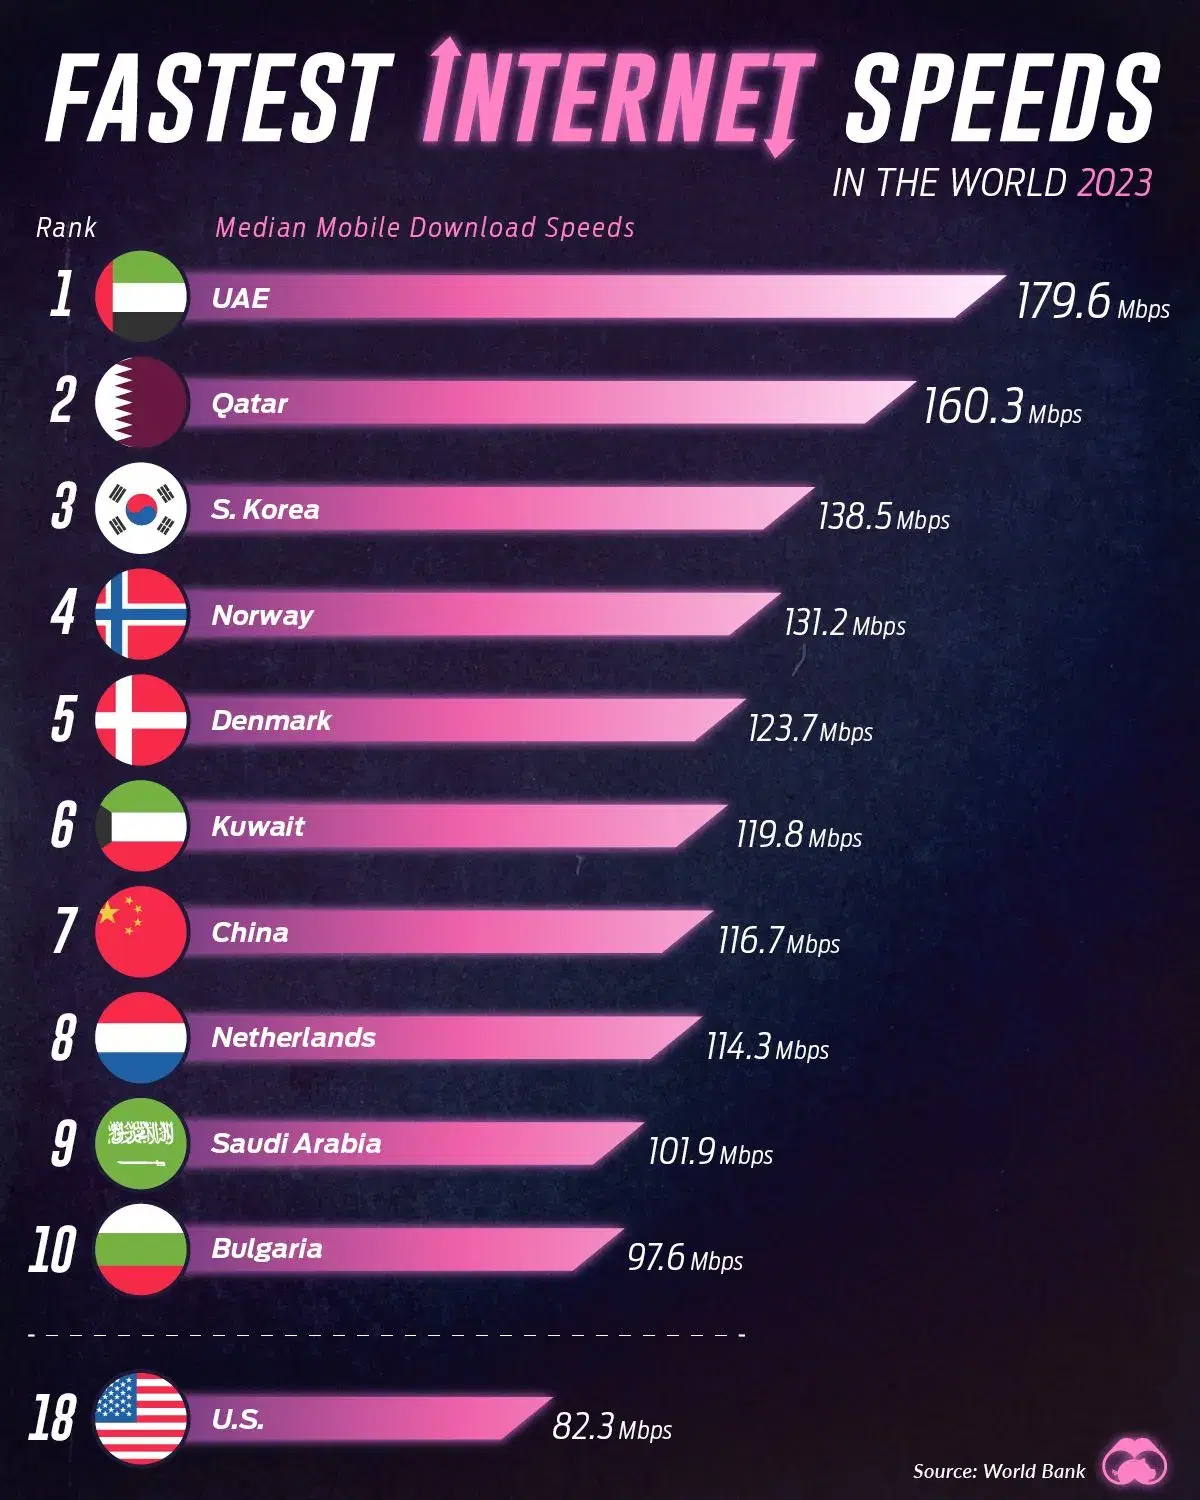 The Fastest Mobile Internet Speeds by Country